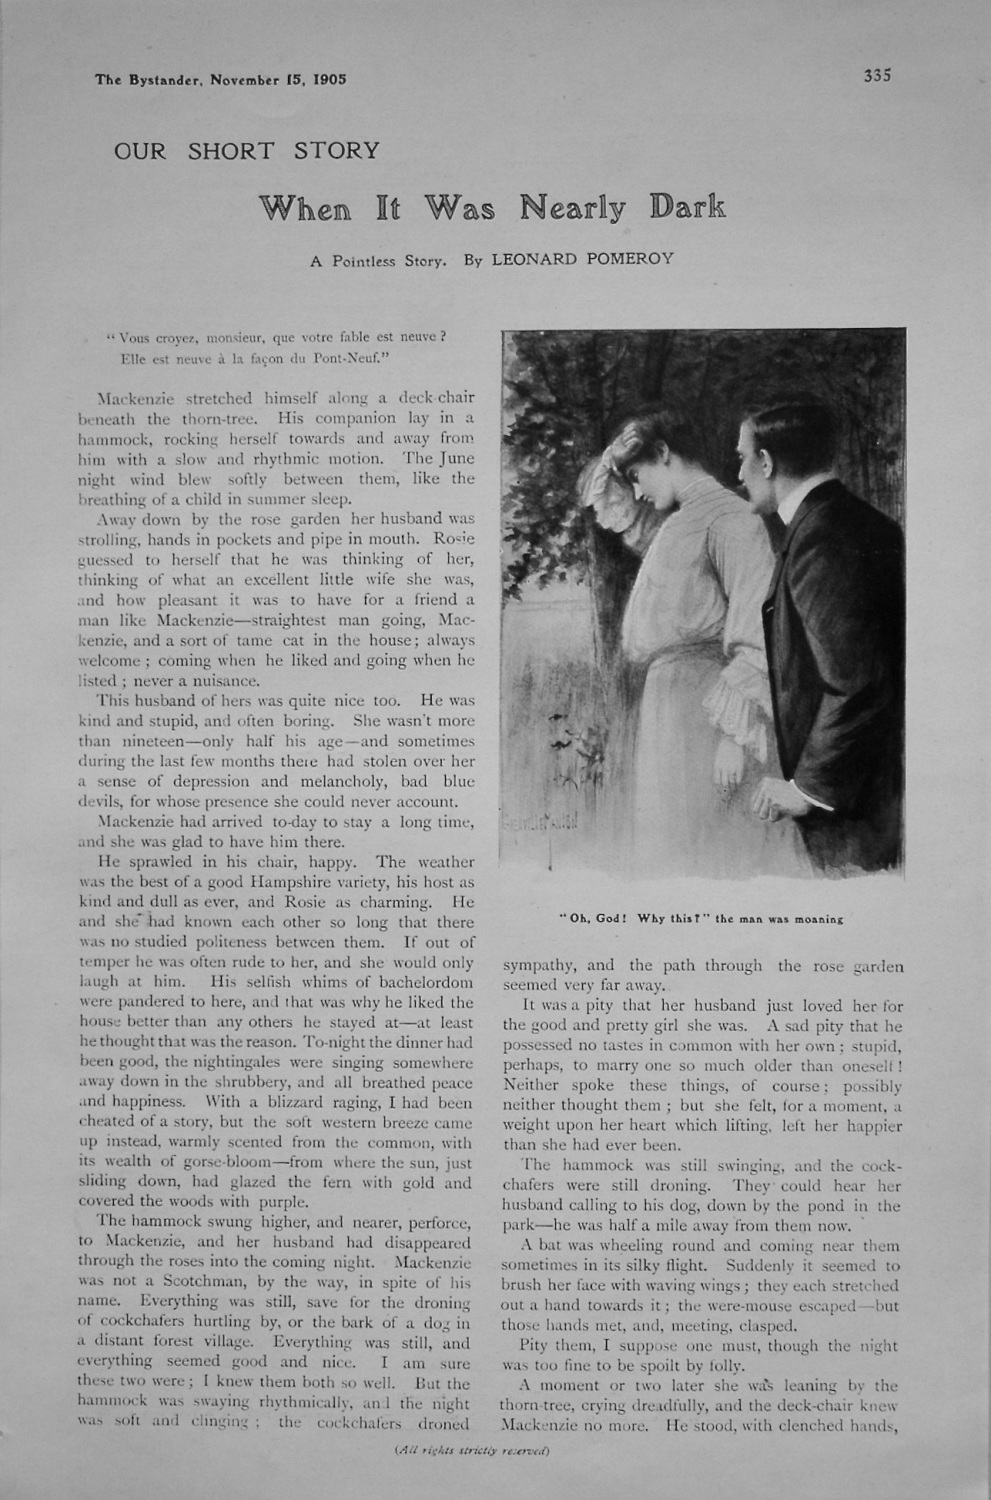 Our Short Story. (Weekly Story) 1905.